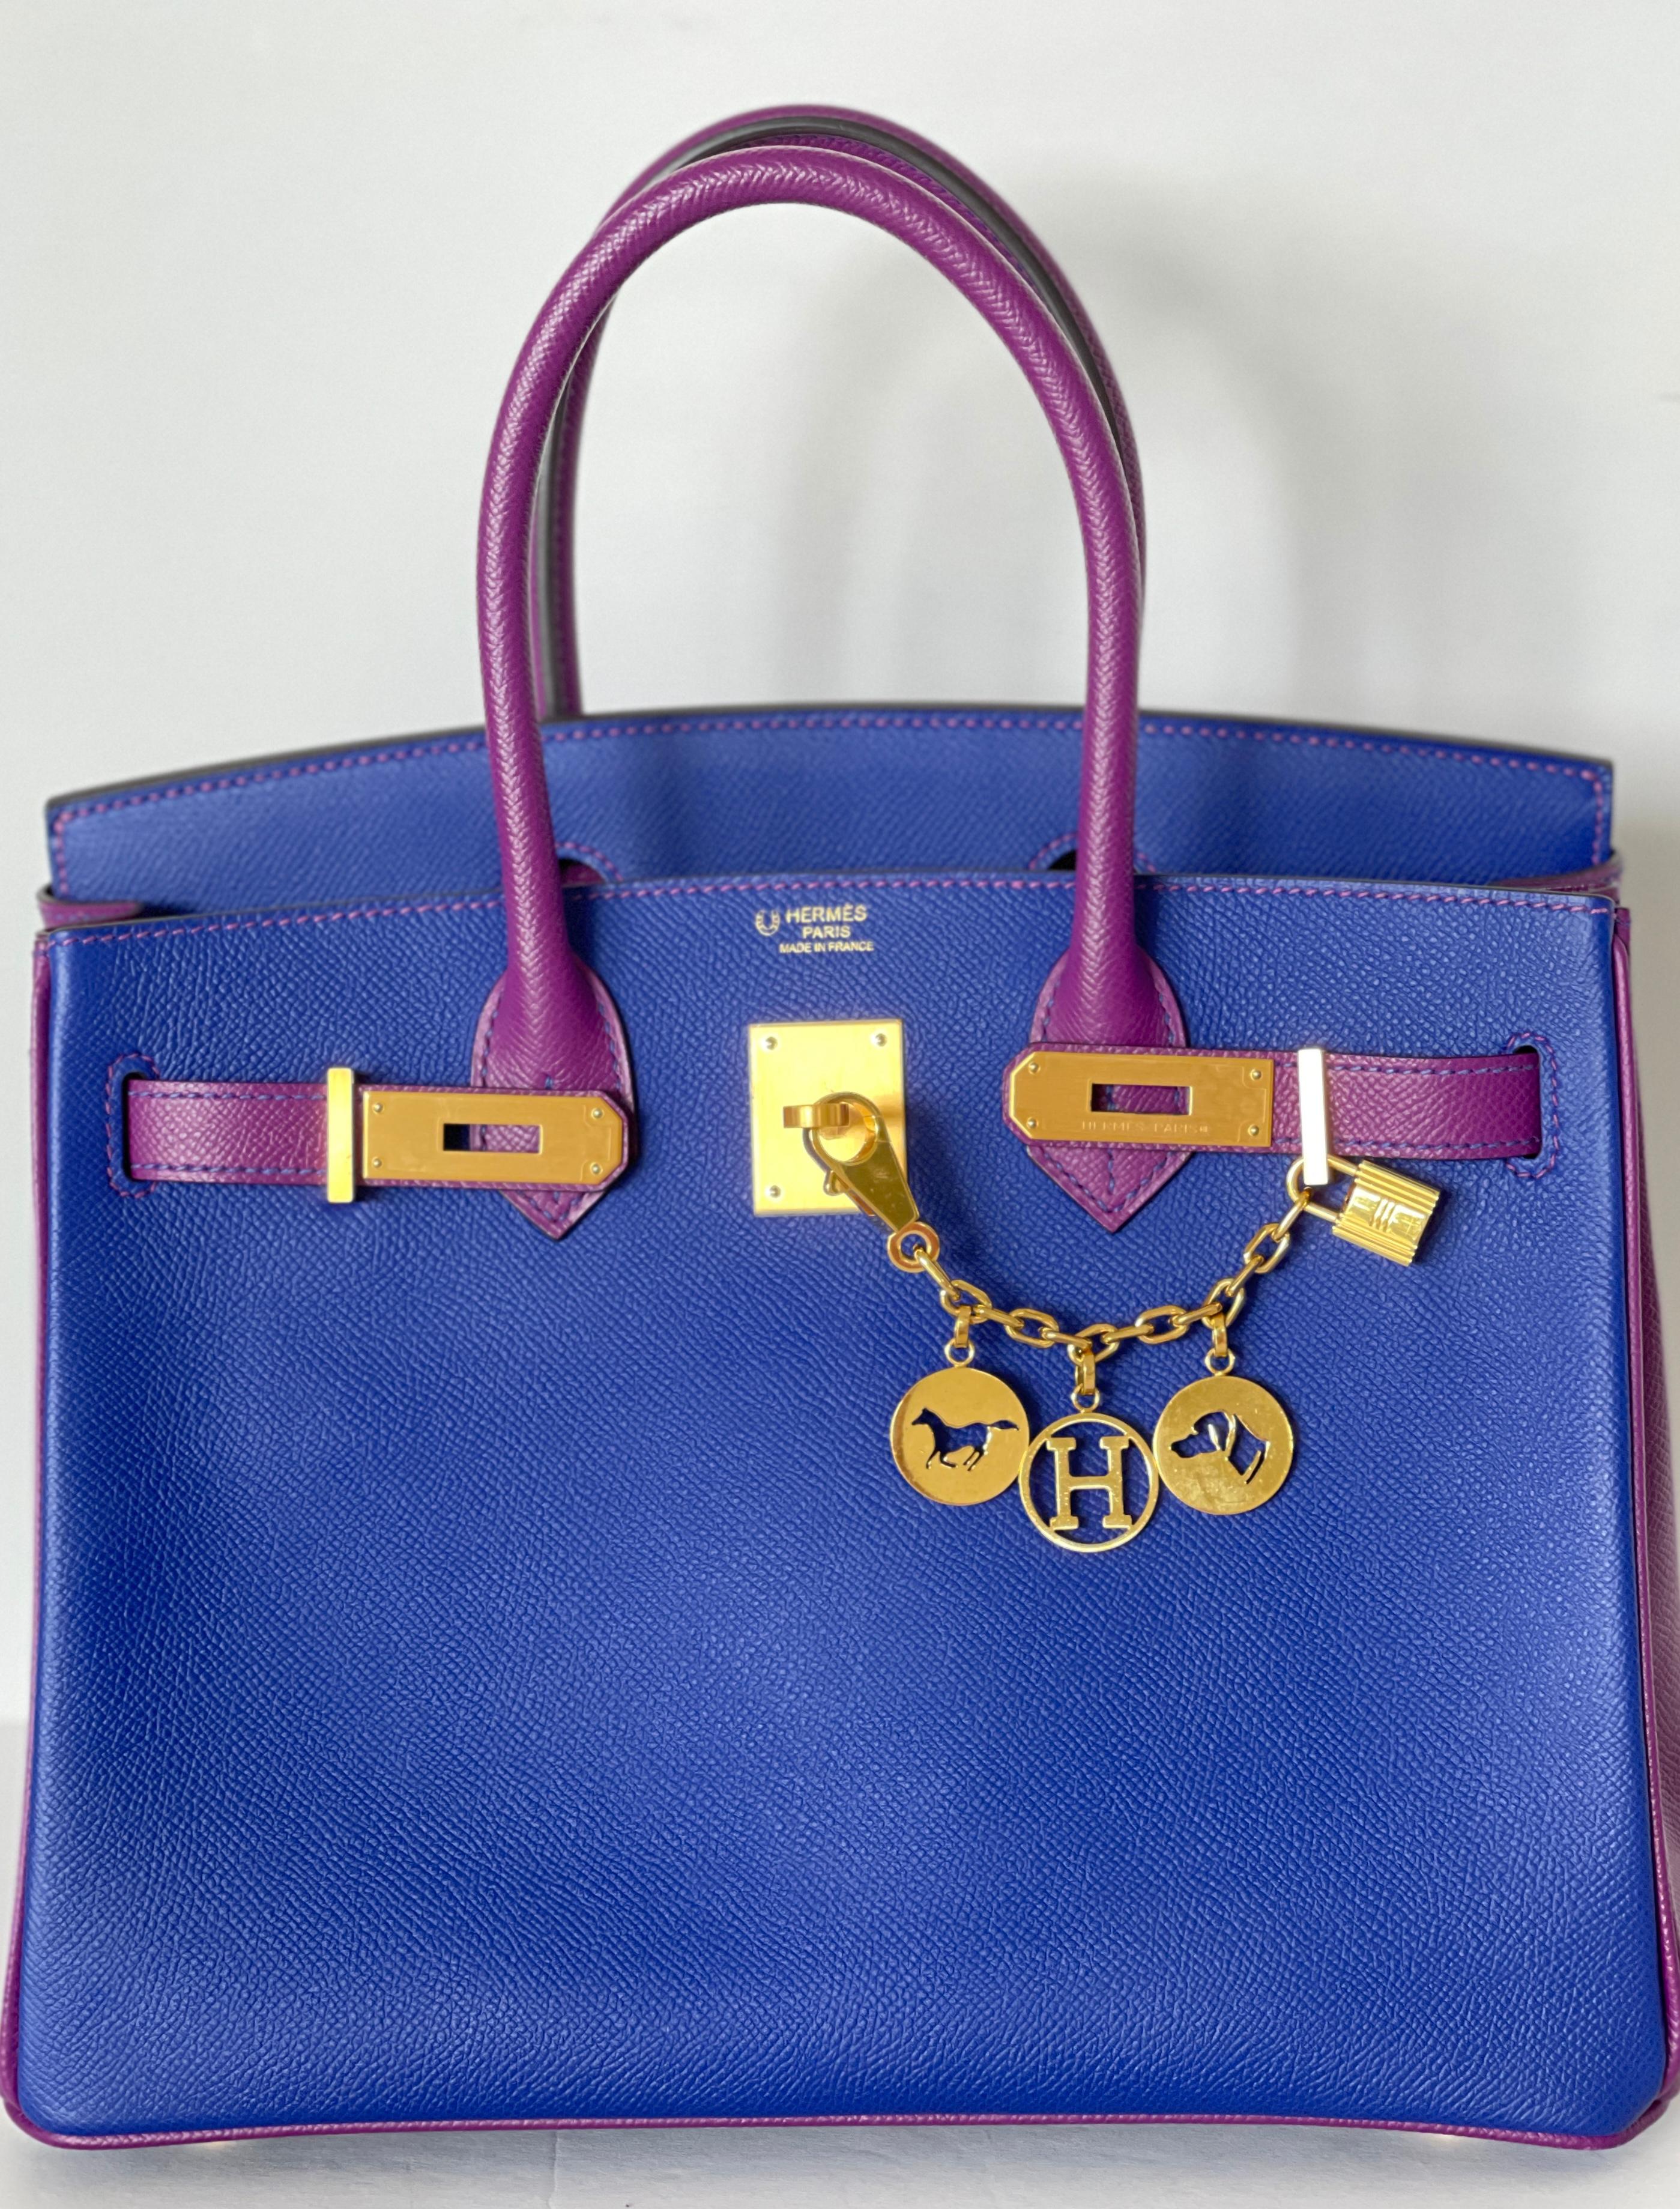 Hermes Birkin 30cm
VIP Special order Birkin 
Horseshoe Stamp
Anemone and Blue Electric
Contrasting stitching throughout
The front, back and bottom are done in Blue Electric
The sides, straps, and handles are done in Anemone
Inside is lined in